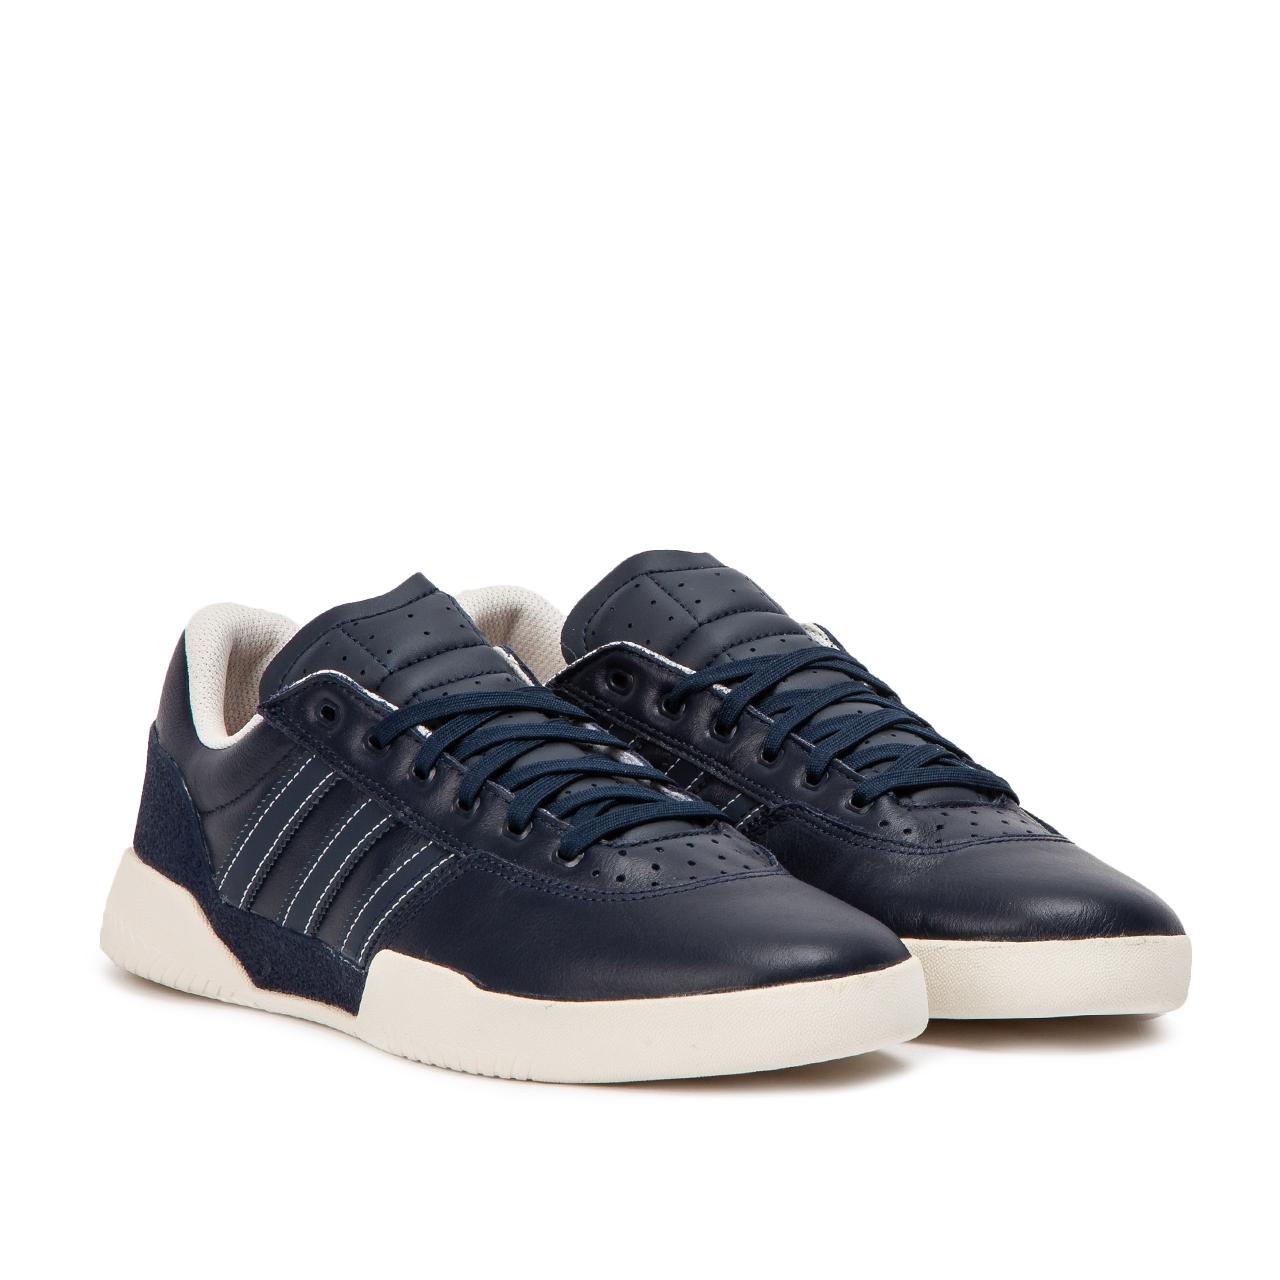 adidas Leather Adidas City Cup in Navy (Blue) for Men - Lyst